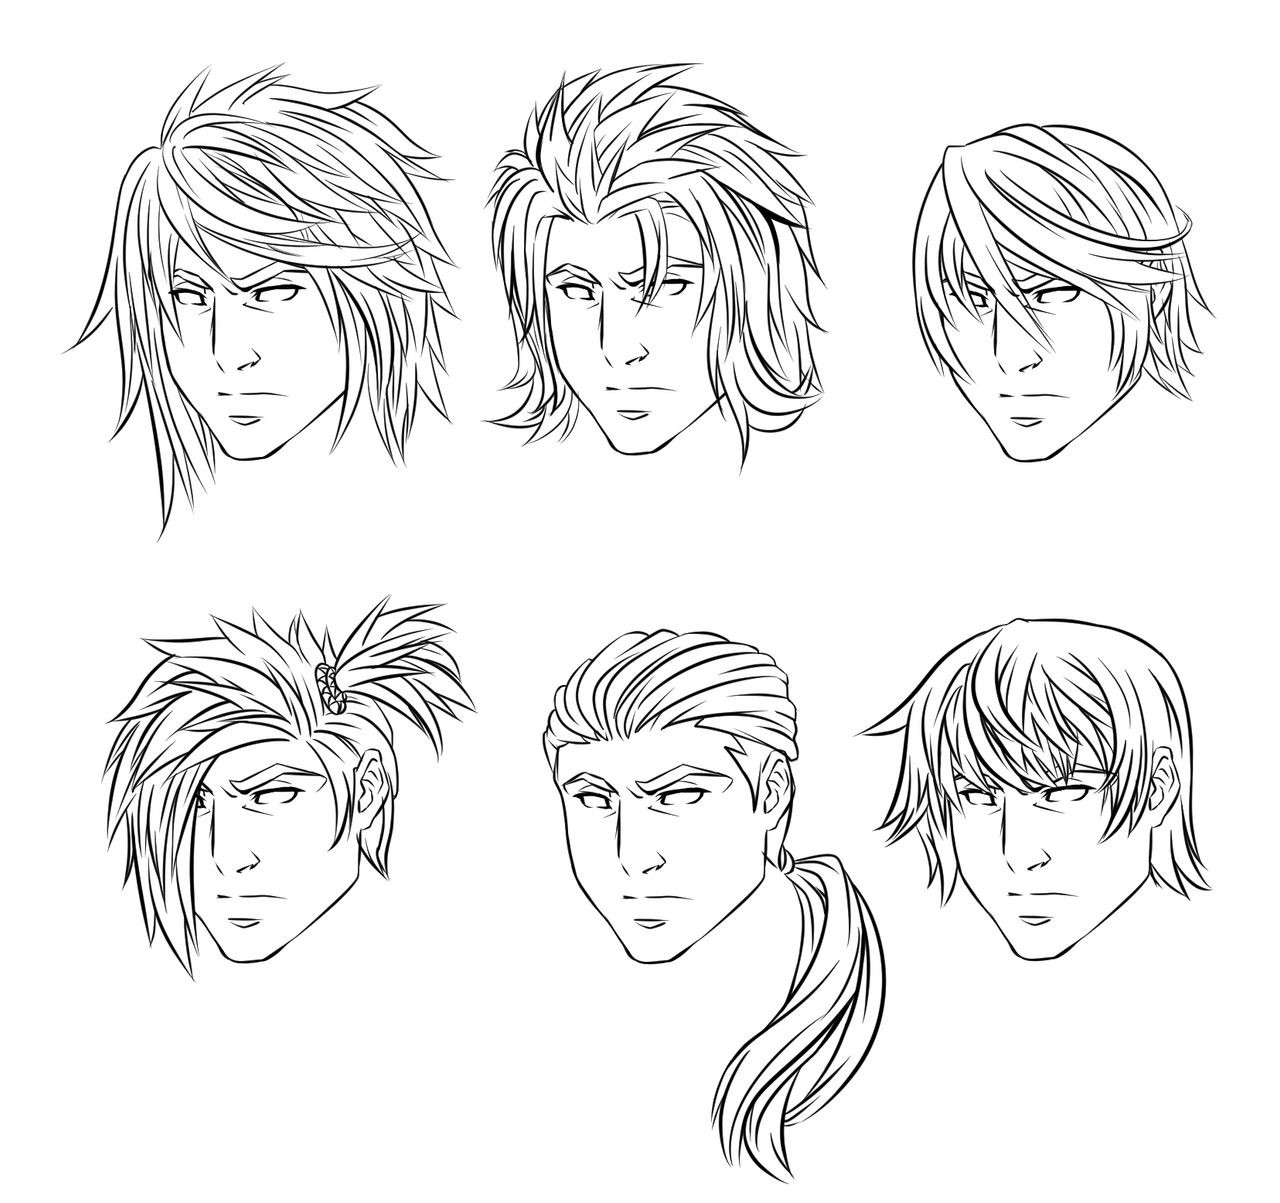 Anime Hairstyle Male
 Anime Male Hairstyles by CrimsonCypher on DeviantArt